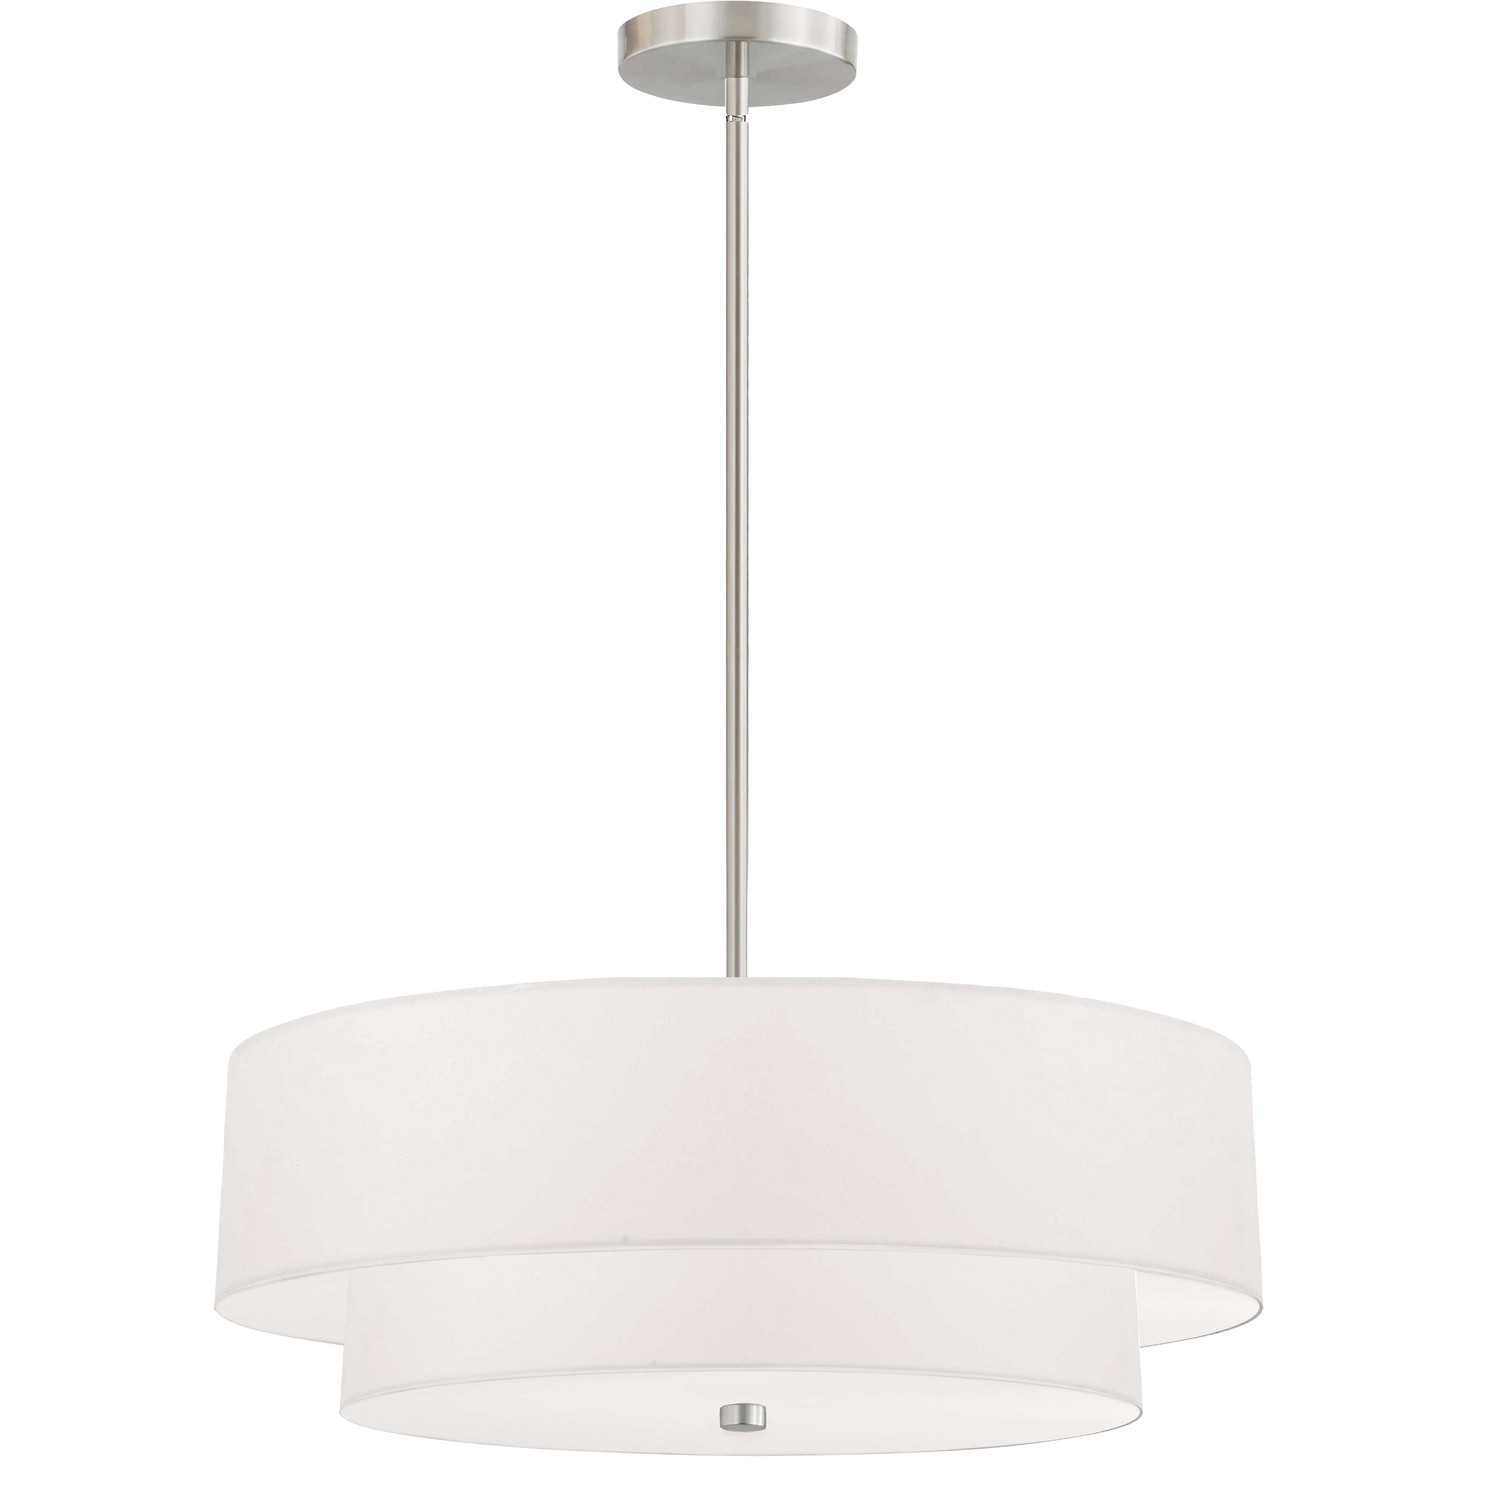 4 Light Incandescent 2 Tier Pendant, Satin Chrome with White Shade